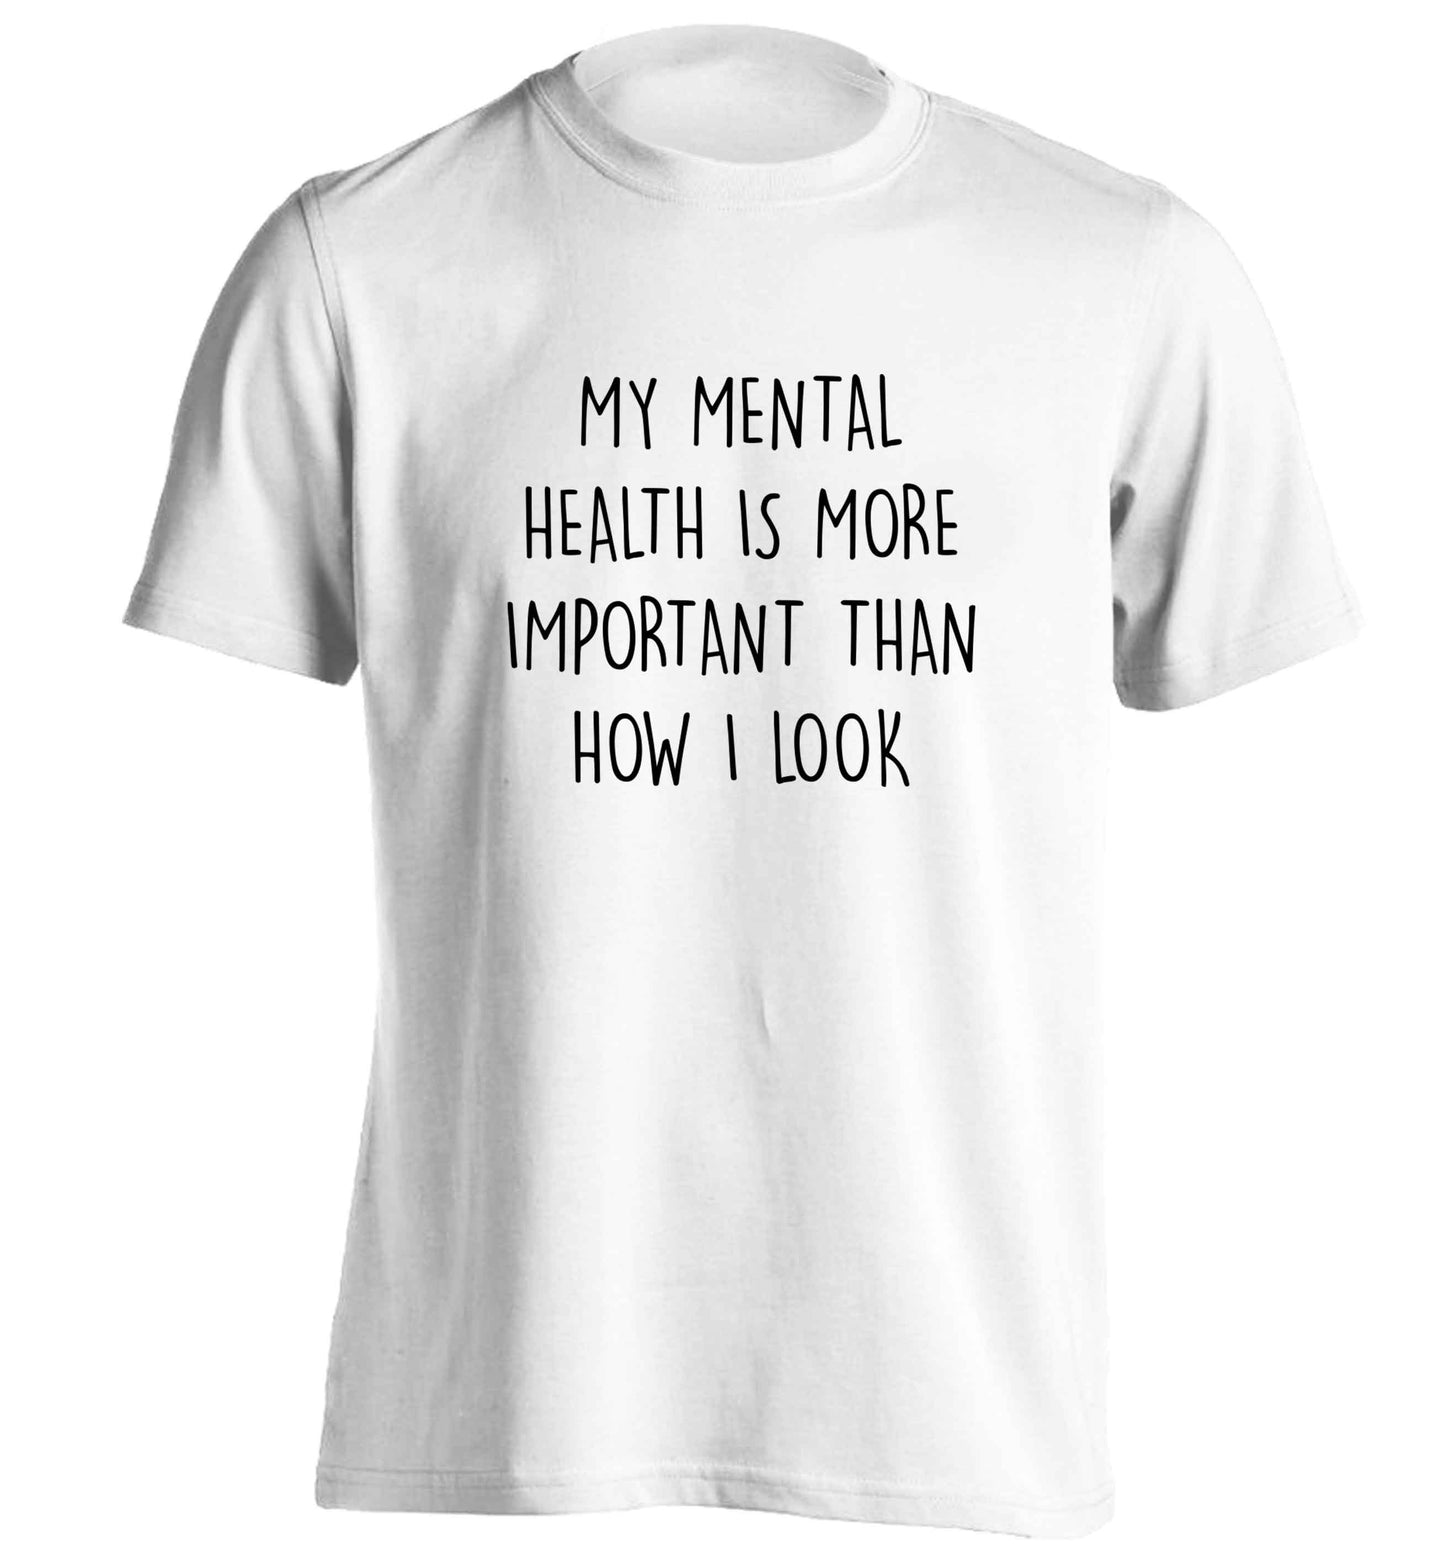 My mental health is more importnat than how I look adults unisex white Tshirt 2XL